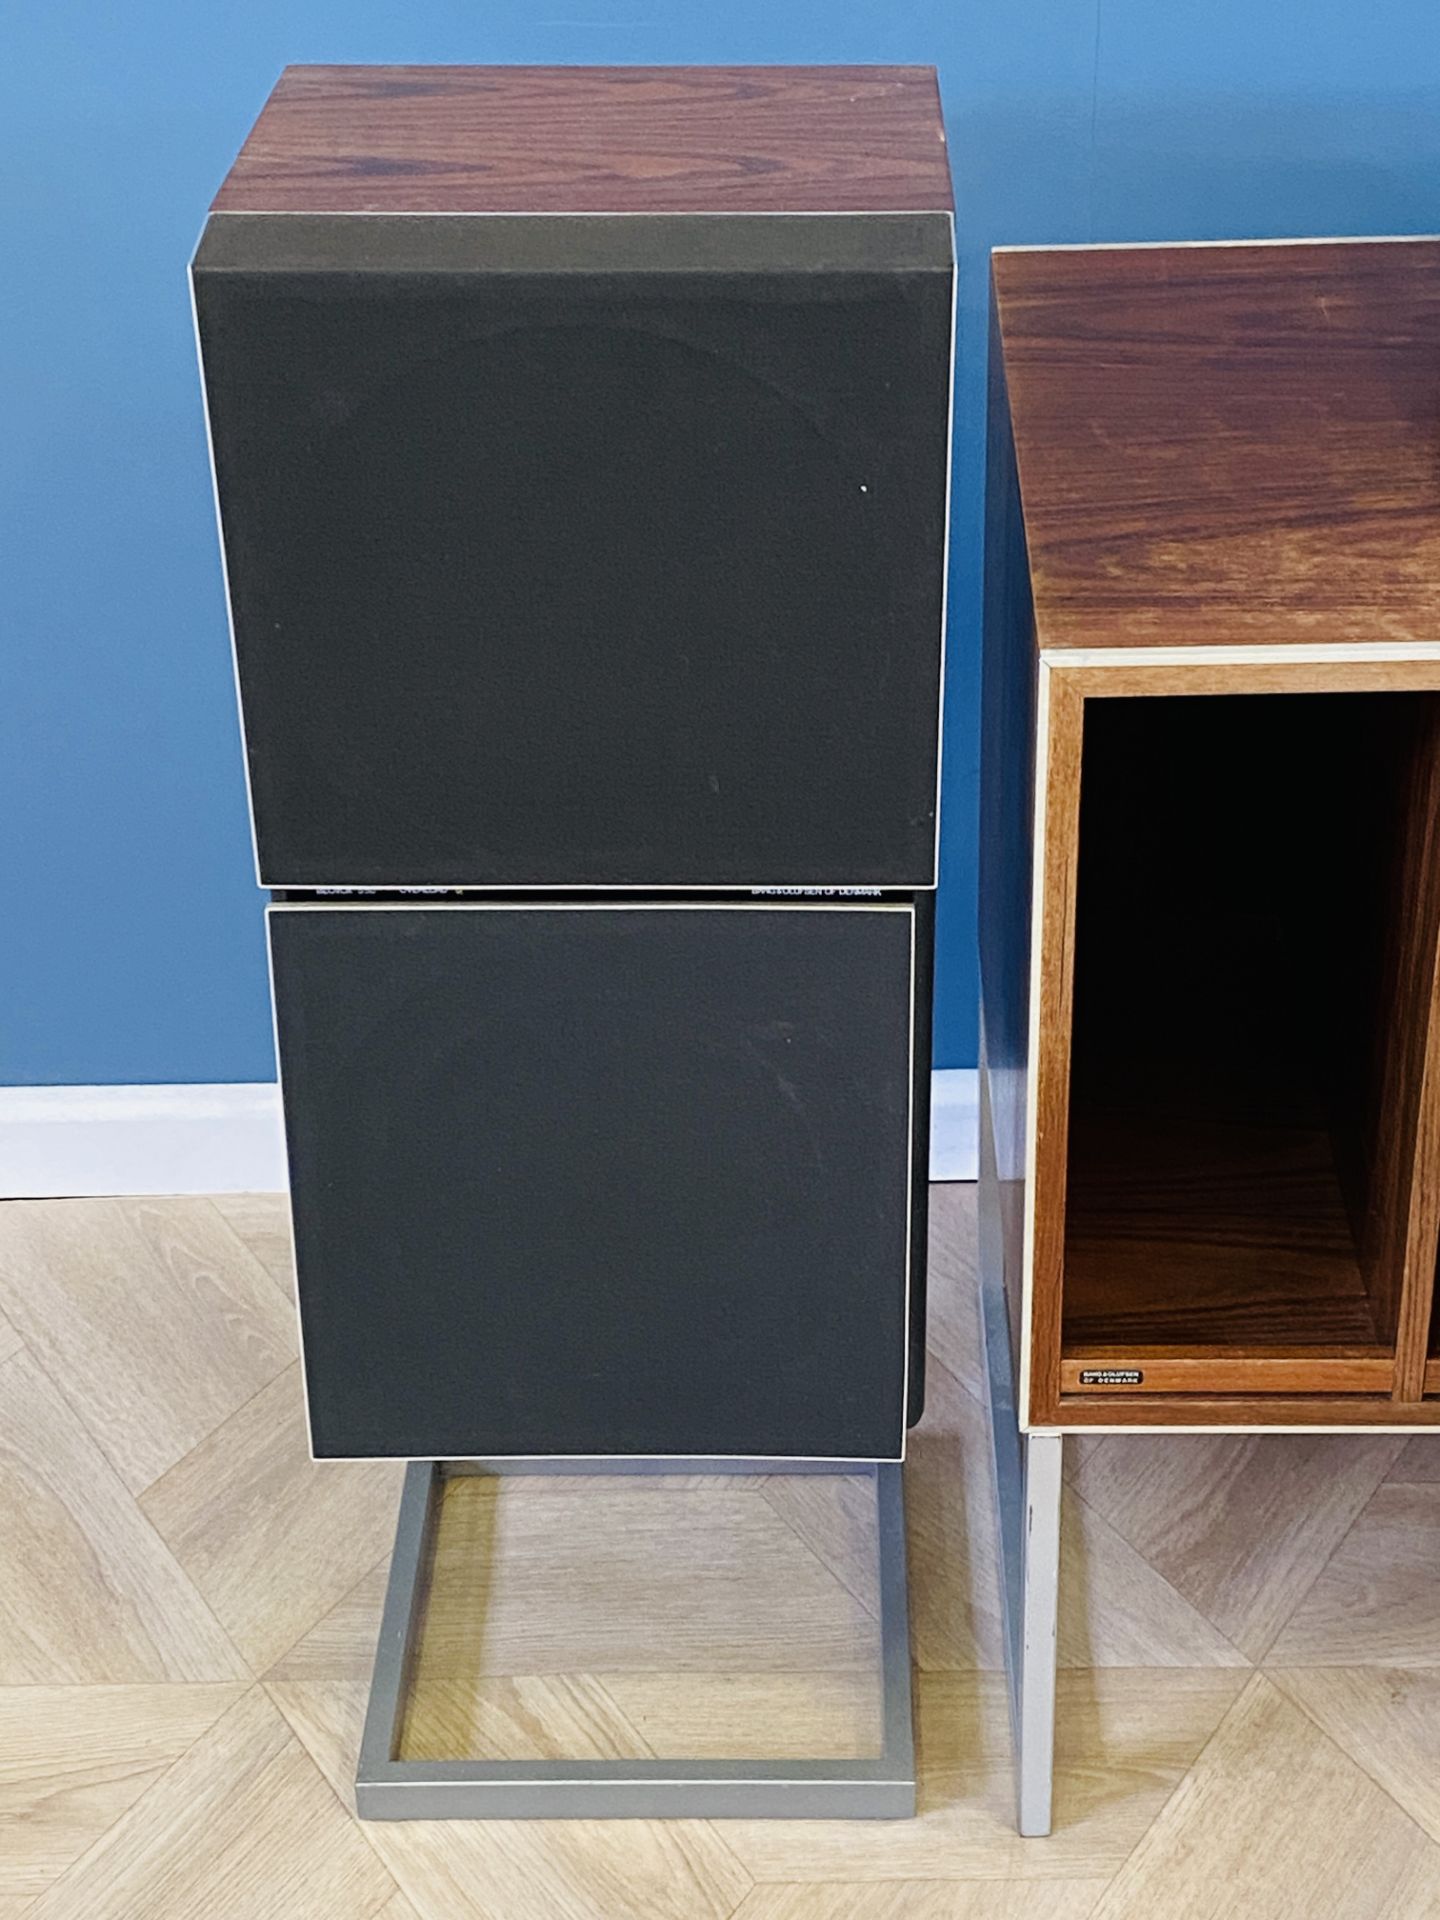 Bang & Olufsen Beomaster 1900-2; Beocord 2400, Beogram 2200 on stand; & Beovox S50's - Image 5 of 9